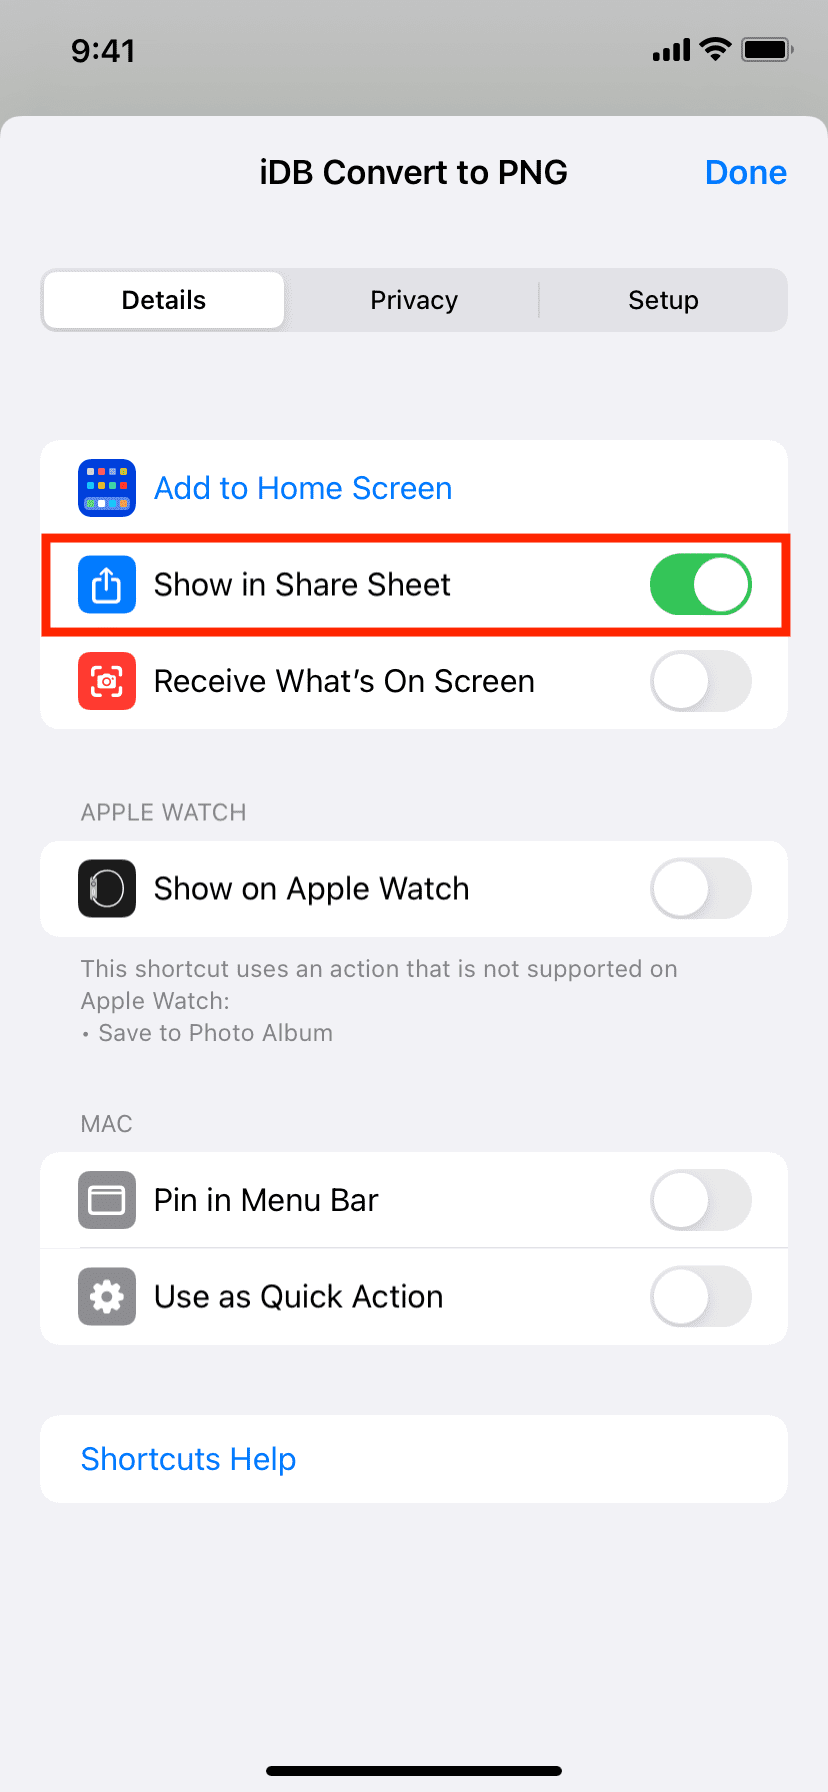 Show in Share Sheet for a shortcut on iPhone